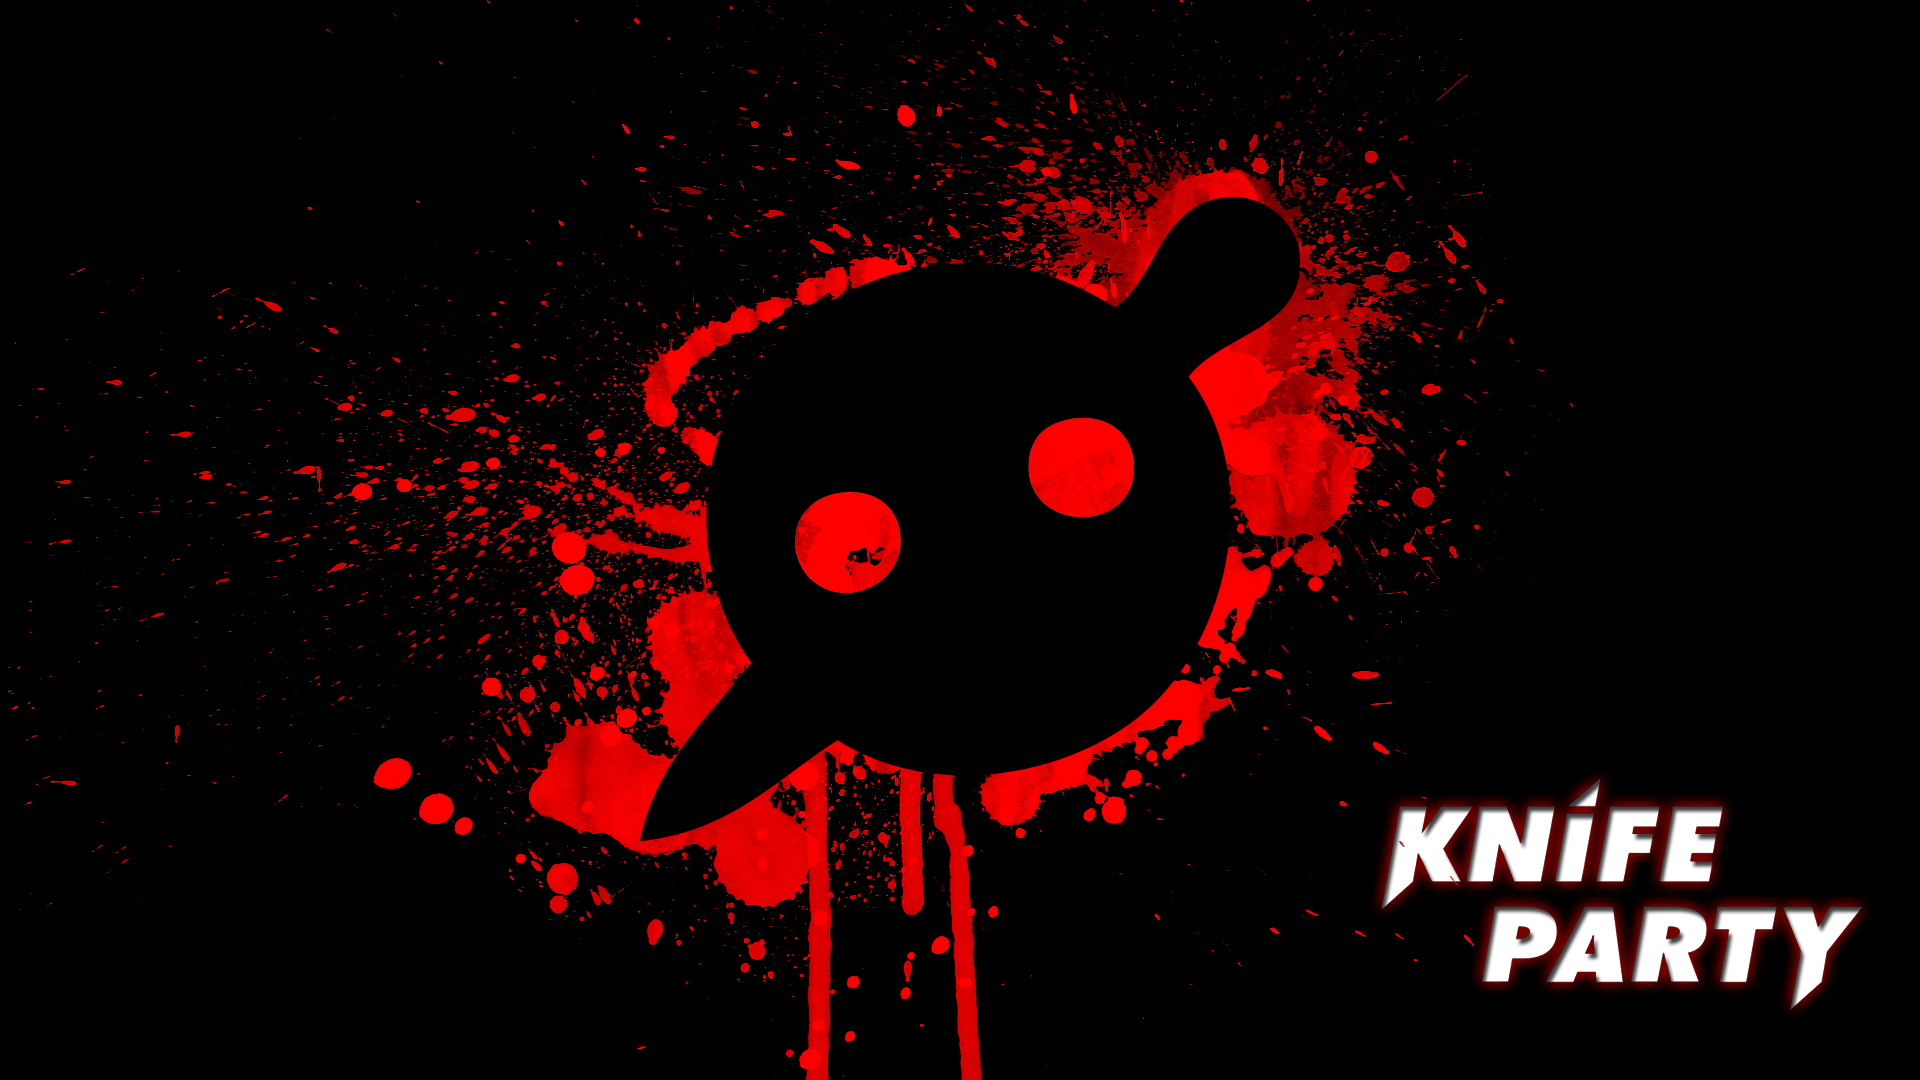 Knife Party [1920x1080]